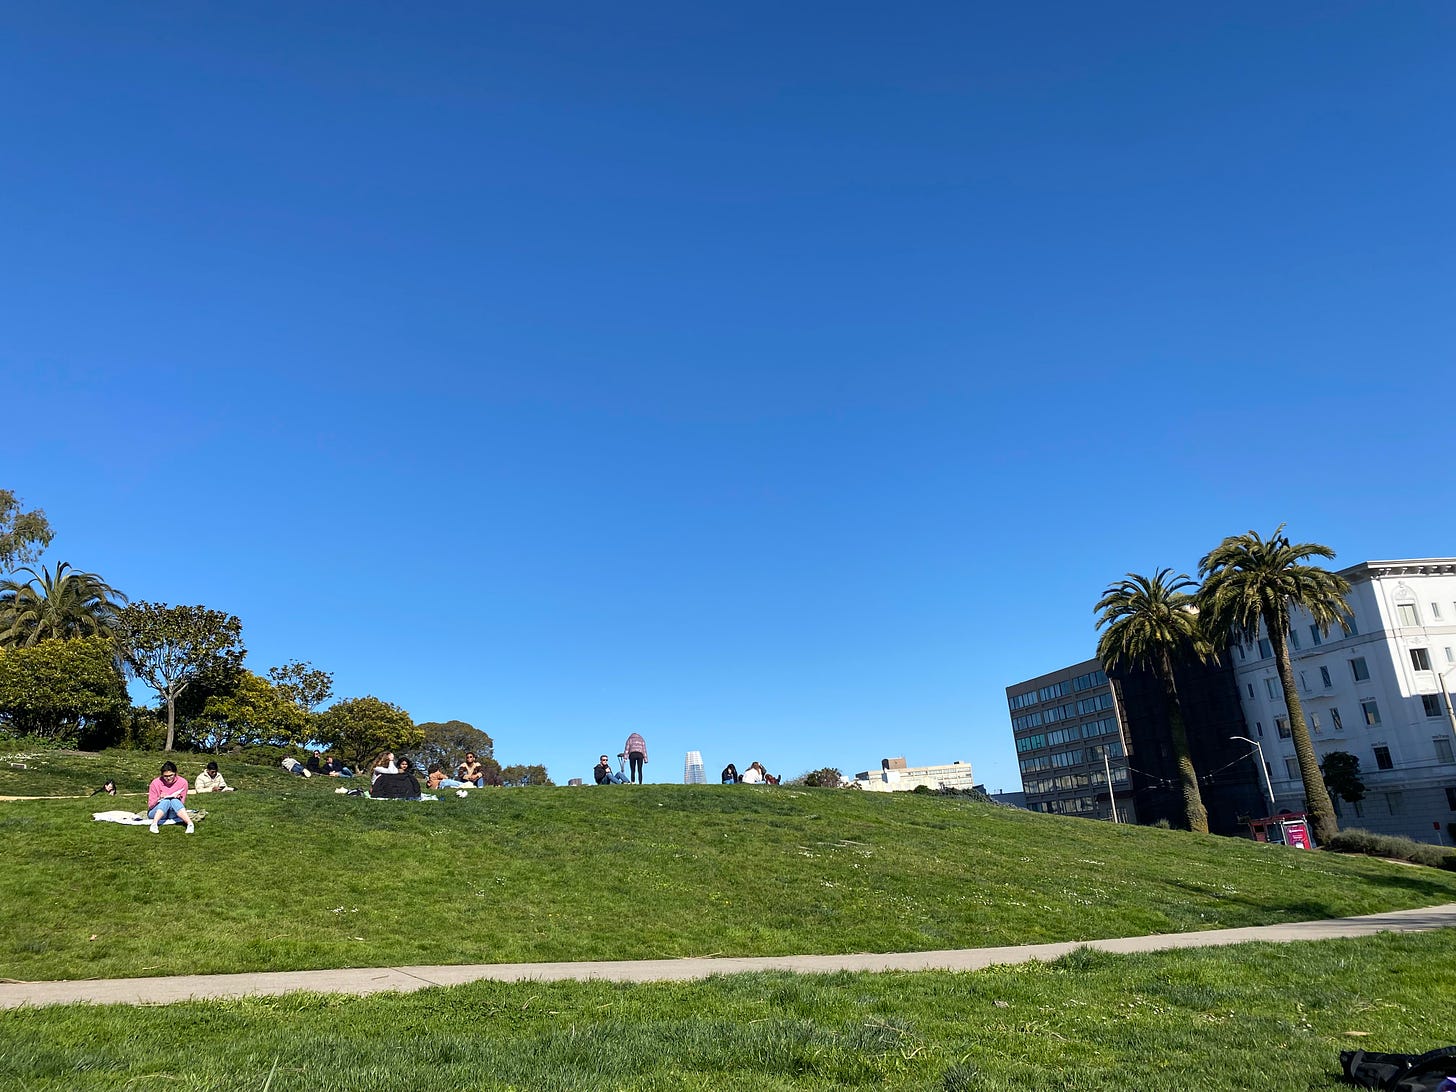 A sunny Sunday afternoon at Lafayette Park in San Francisco